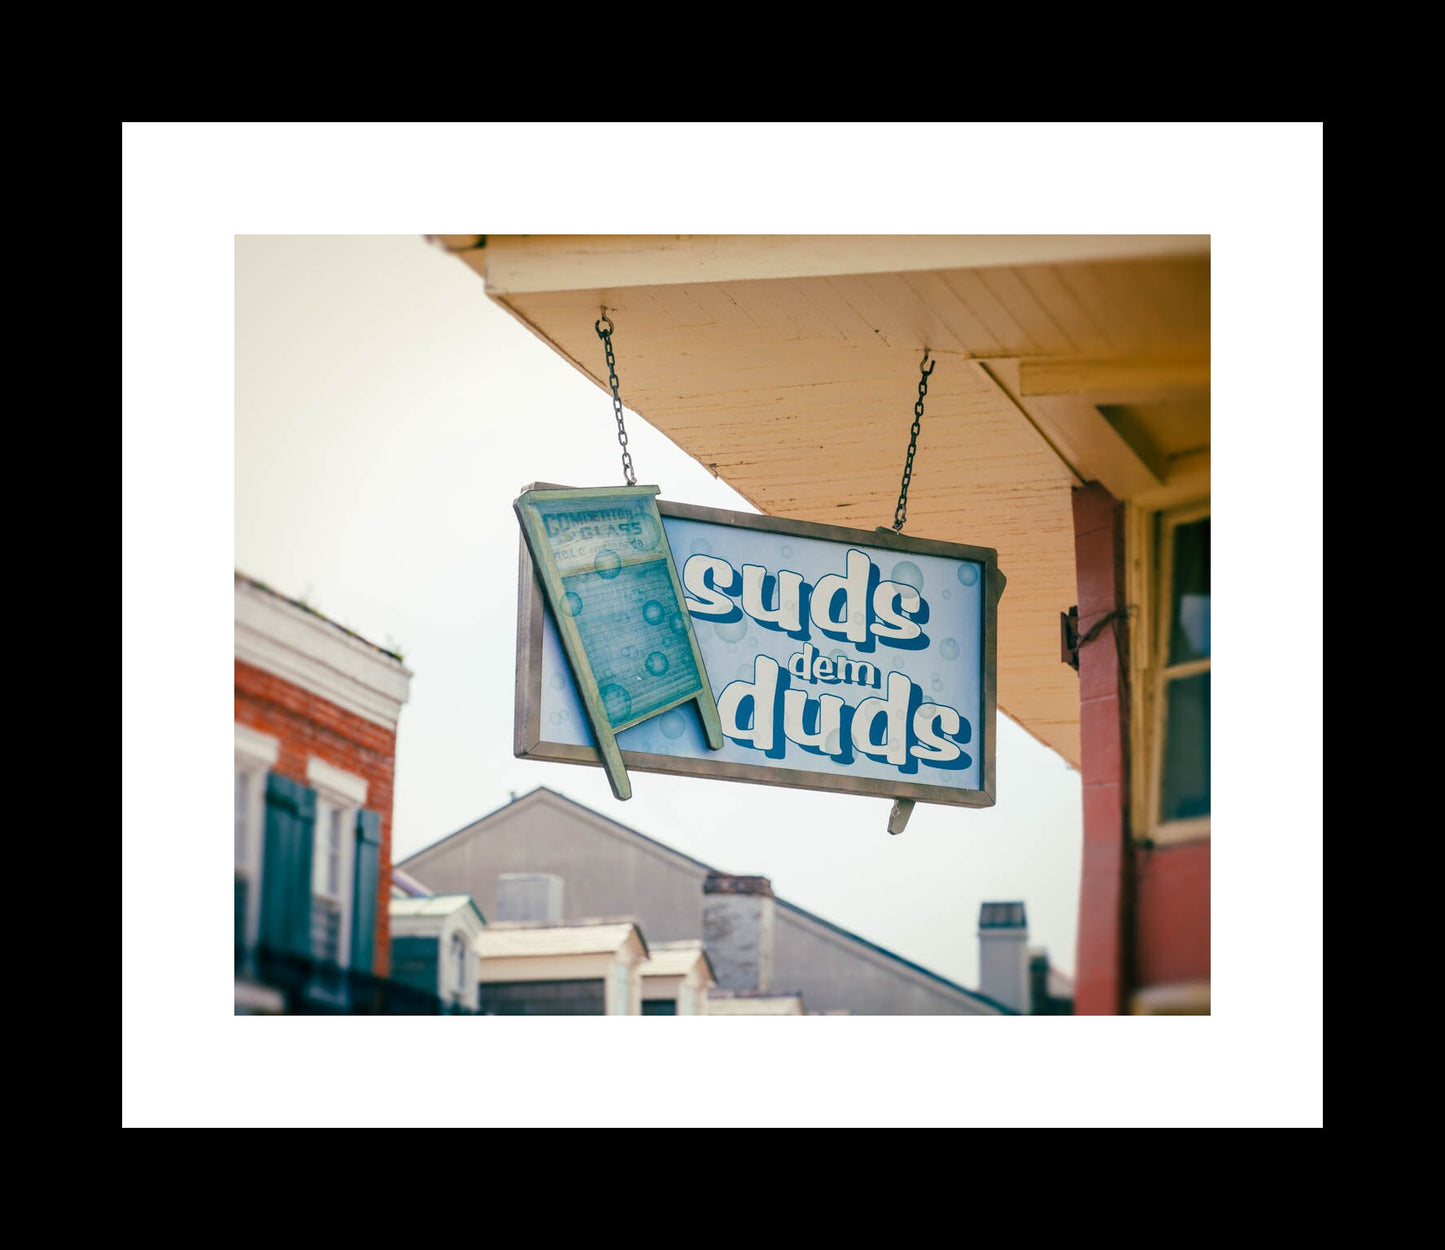 Suds Dem Duds | New Orleans Photography